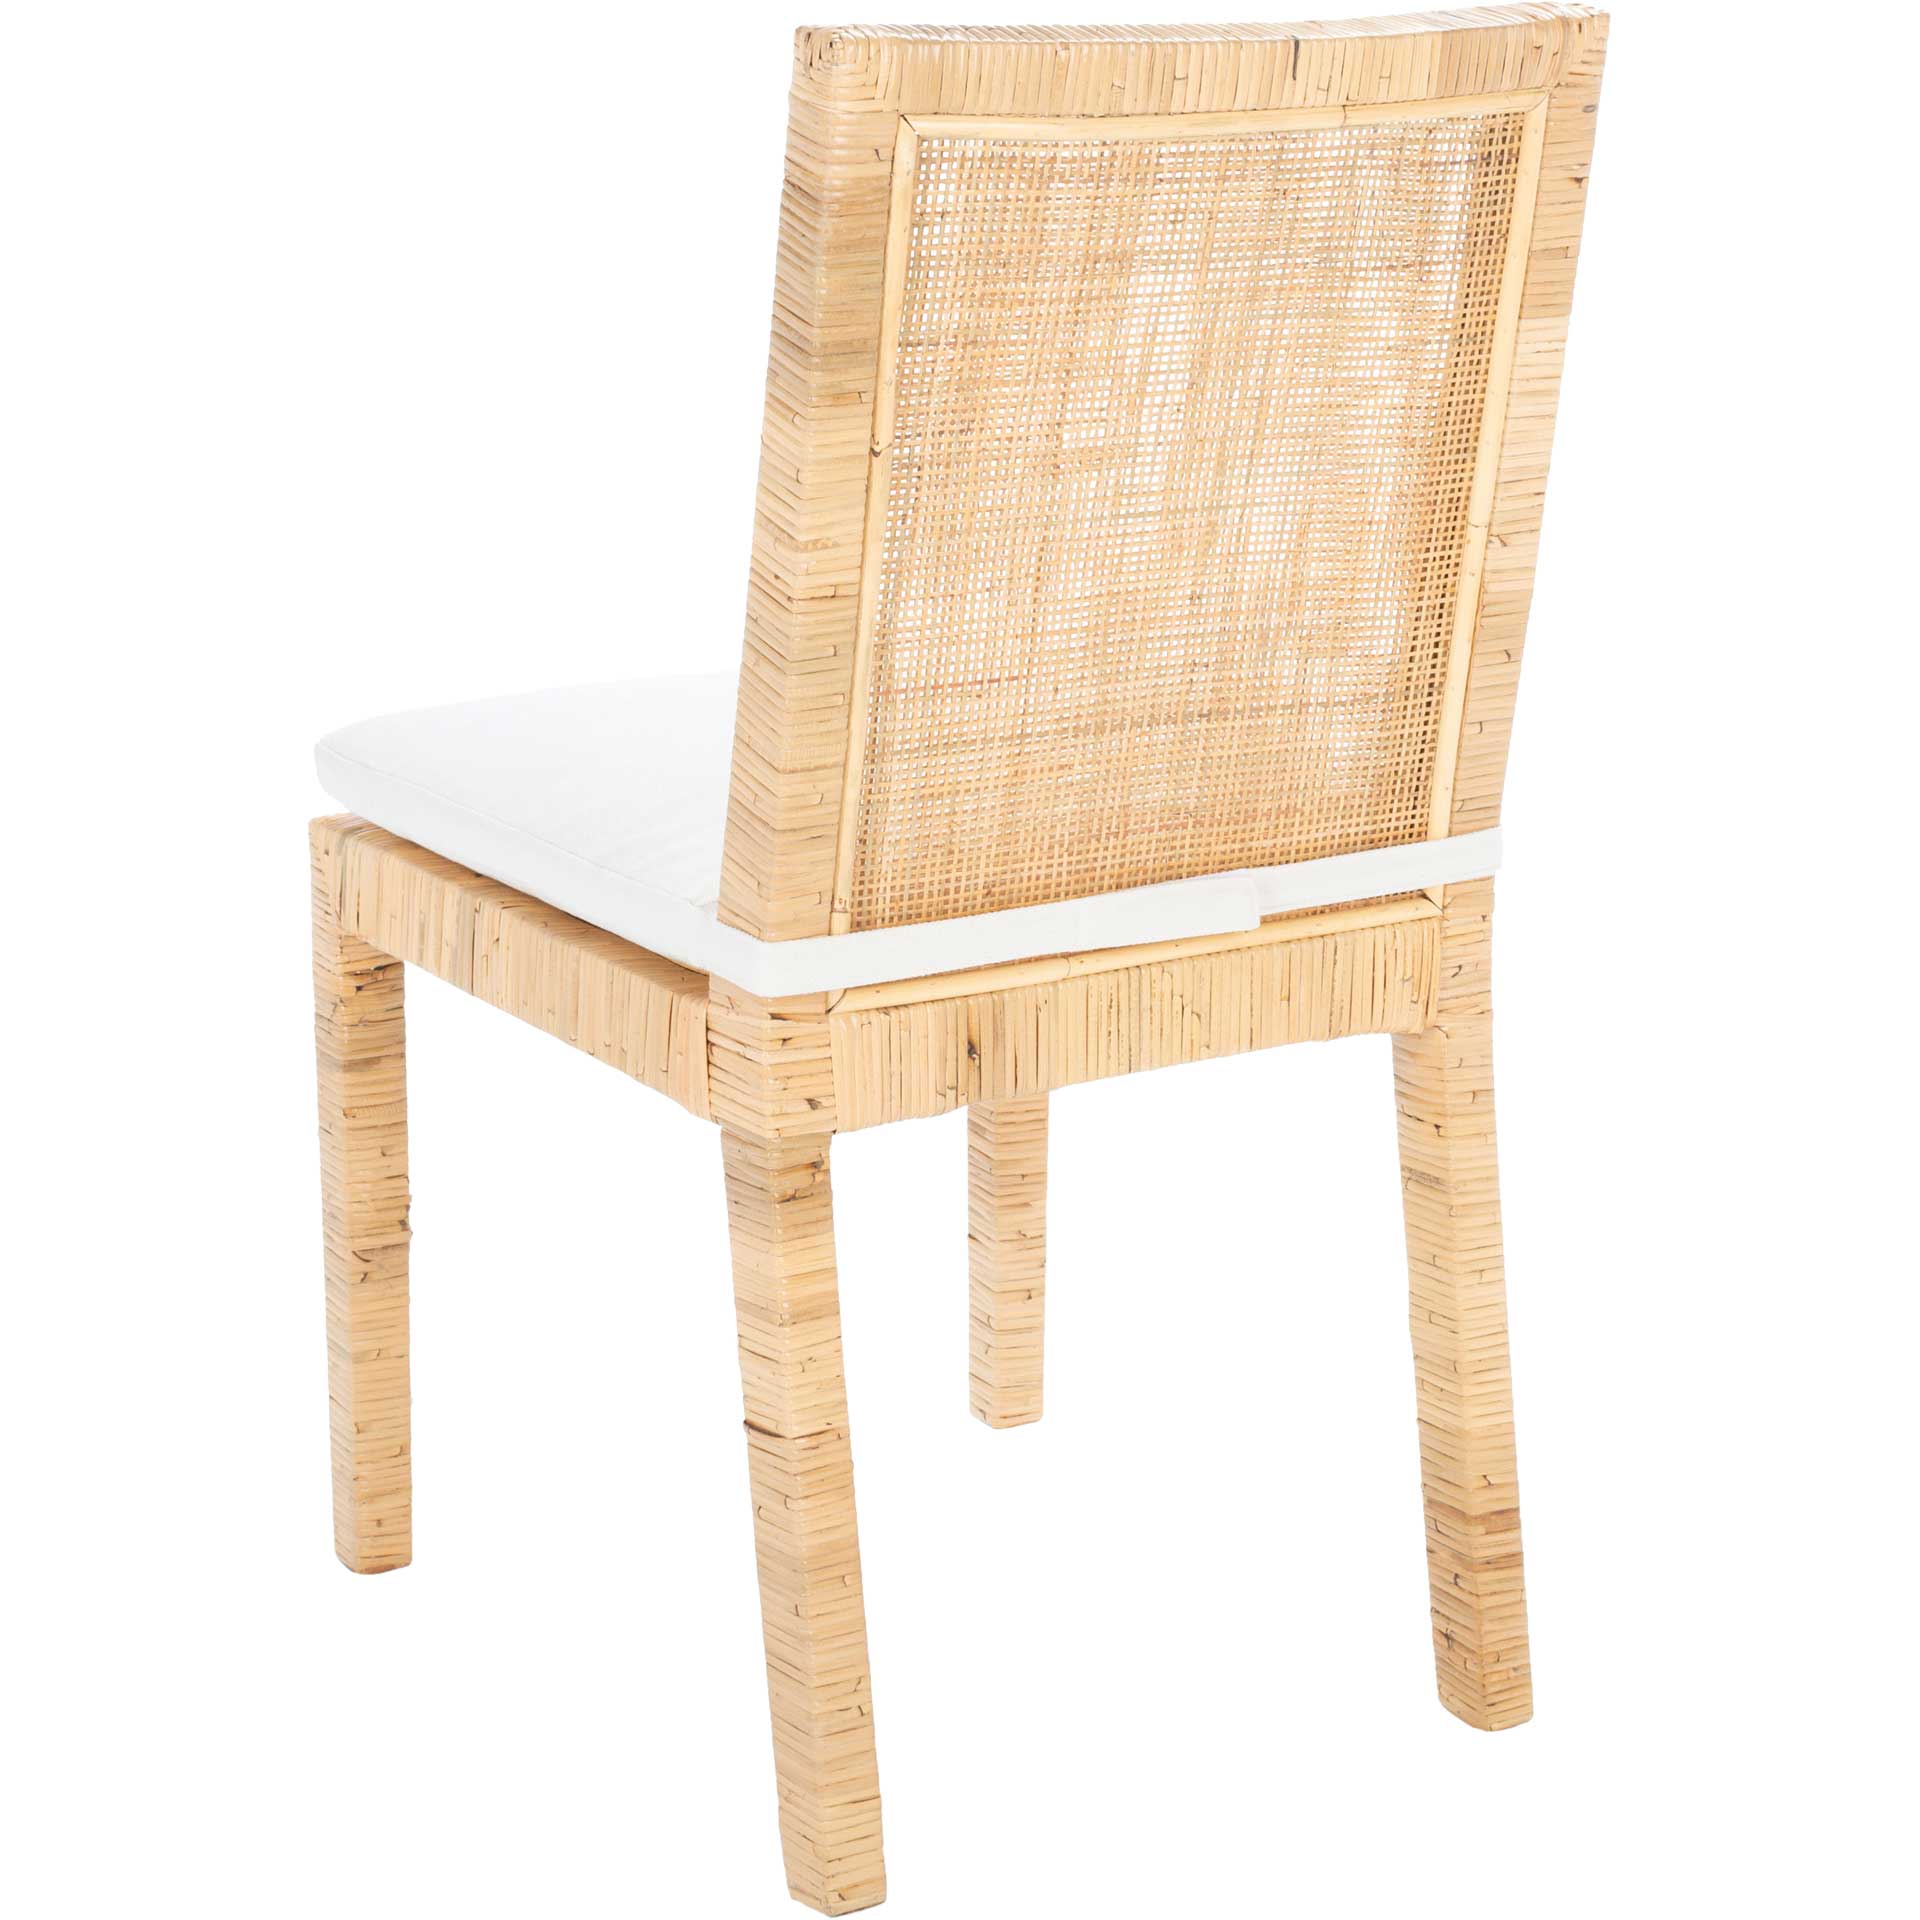 Torence Cane Dining Chair Natural/White (Set of 2)